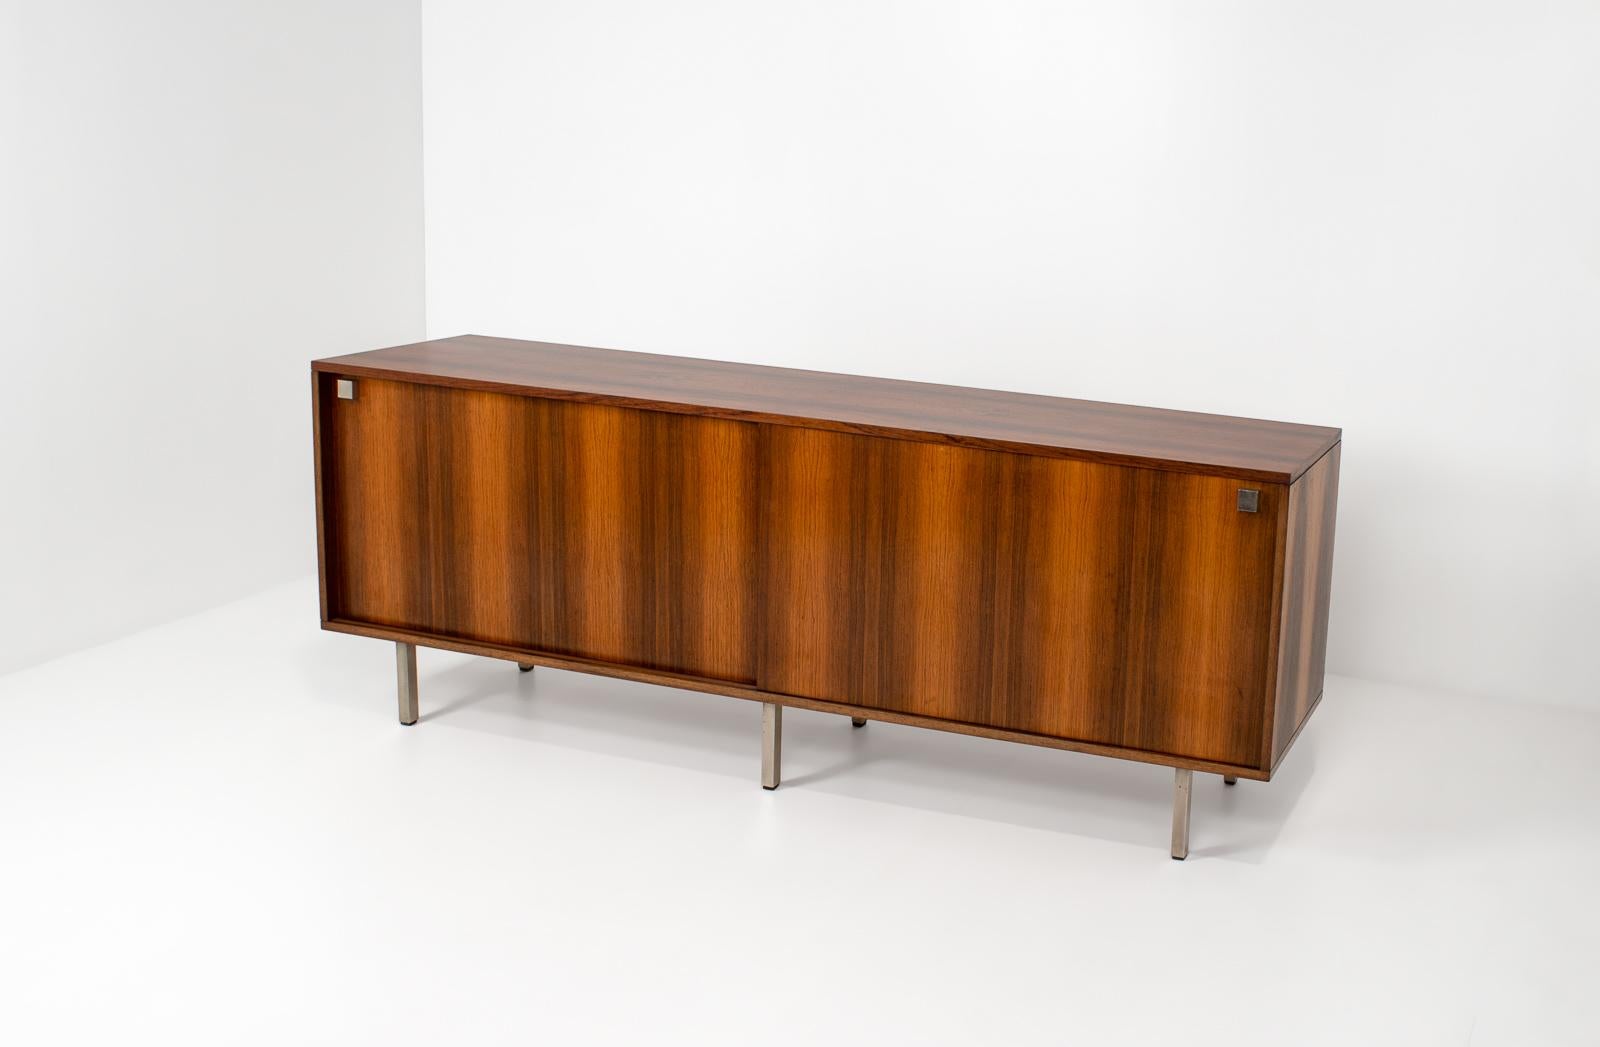 Mid-century, modernist sideboard by Belgian designer Alfred, Hendrickx for Belform, the 1960s. 
Hendrickx was one of the most famous designers from the 1950s and 1960s. He gained fame for the collections he made for the expo '58 in Brussels.